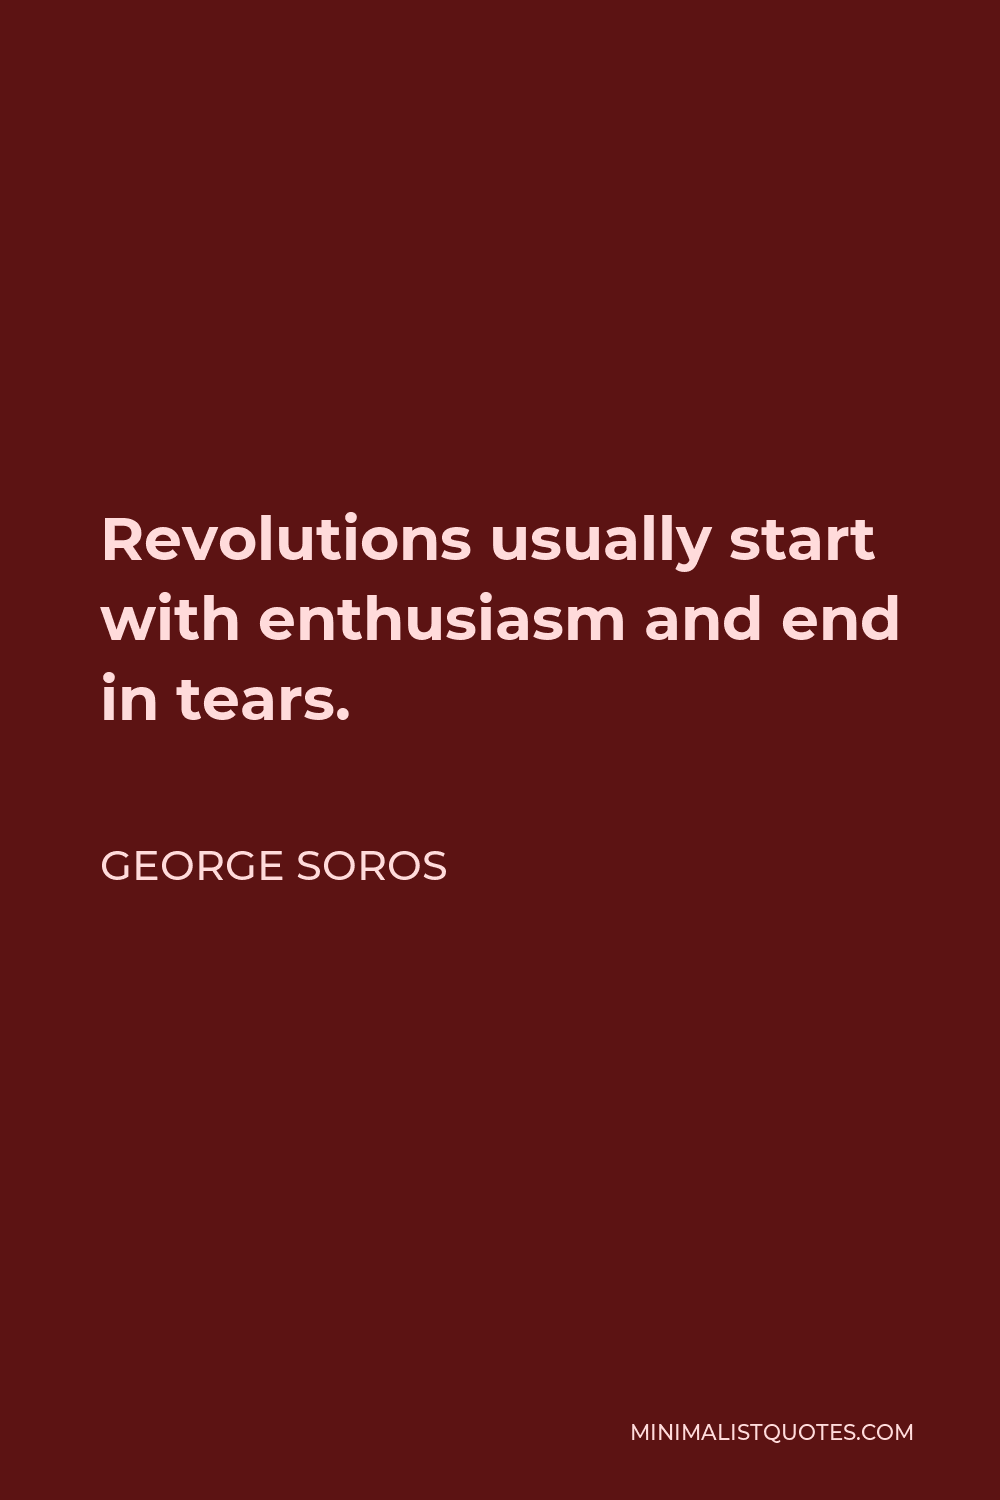 George Soros Quote - Revolutions usually start with enthusiasm and end in tears.